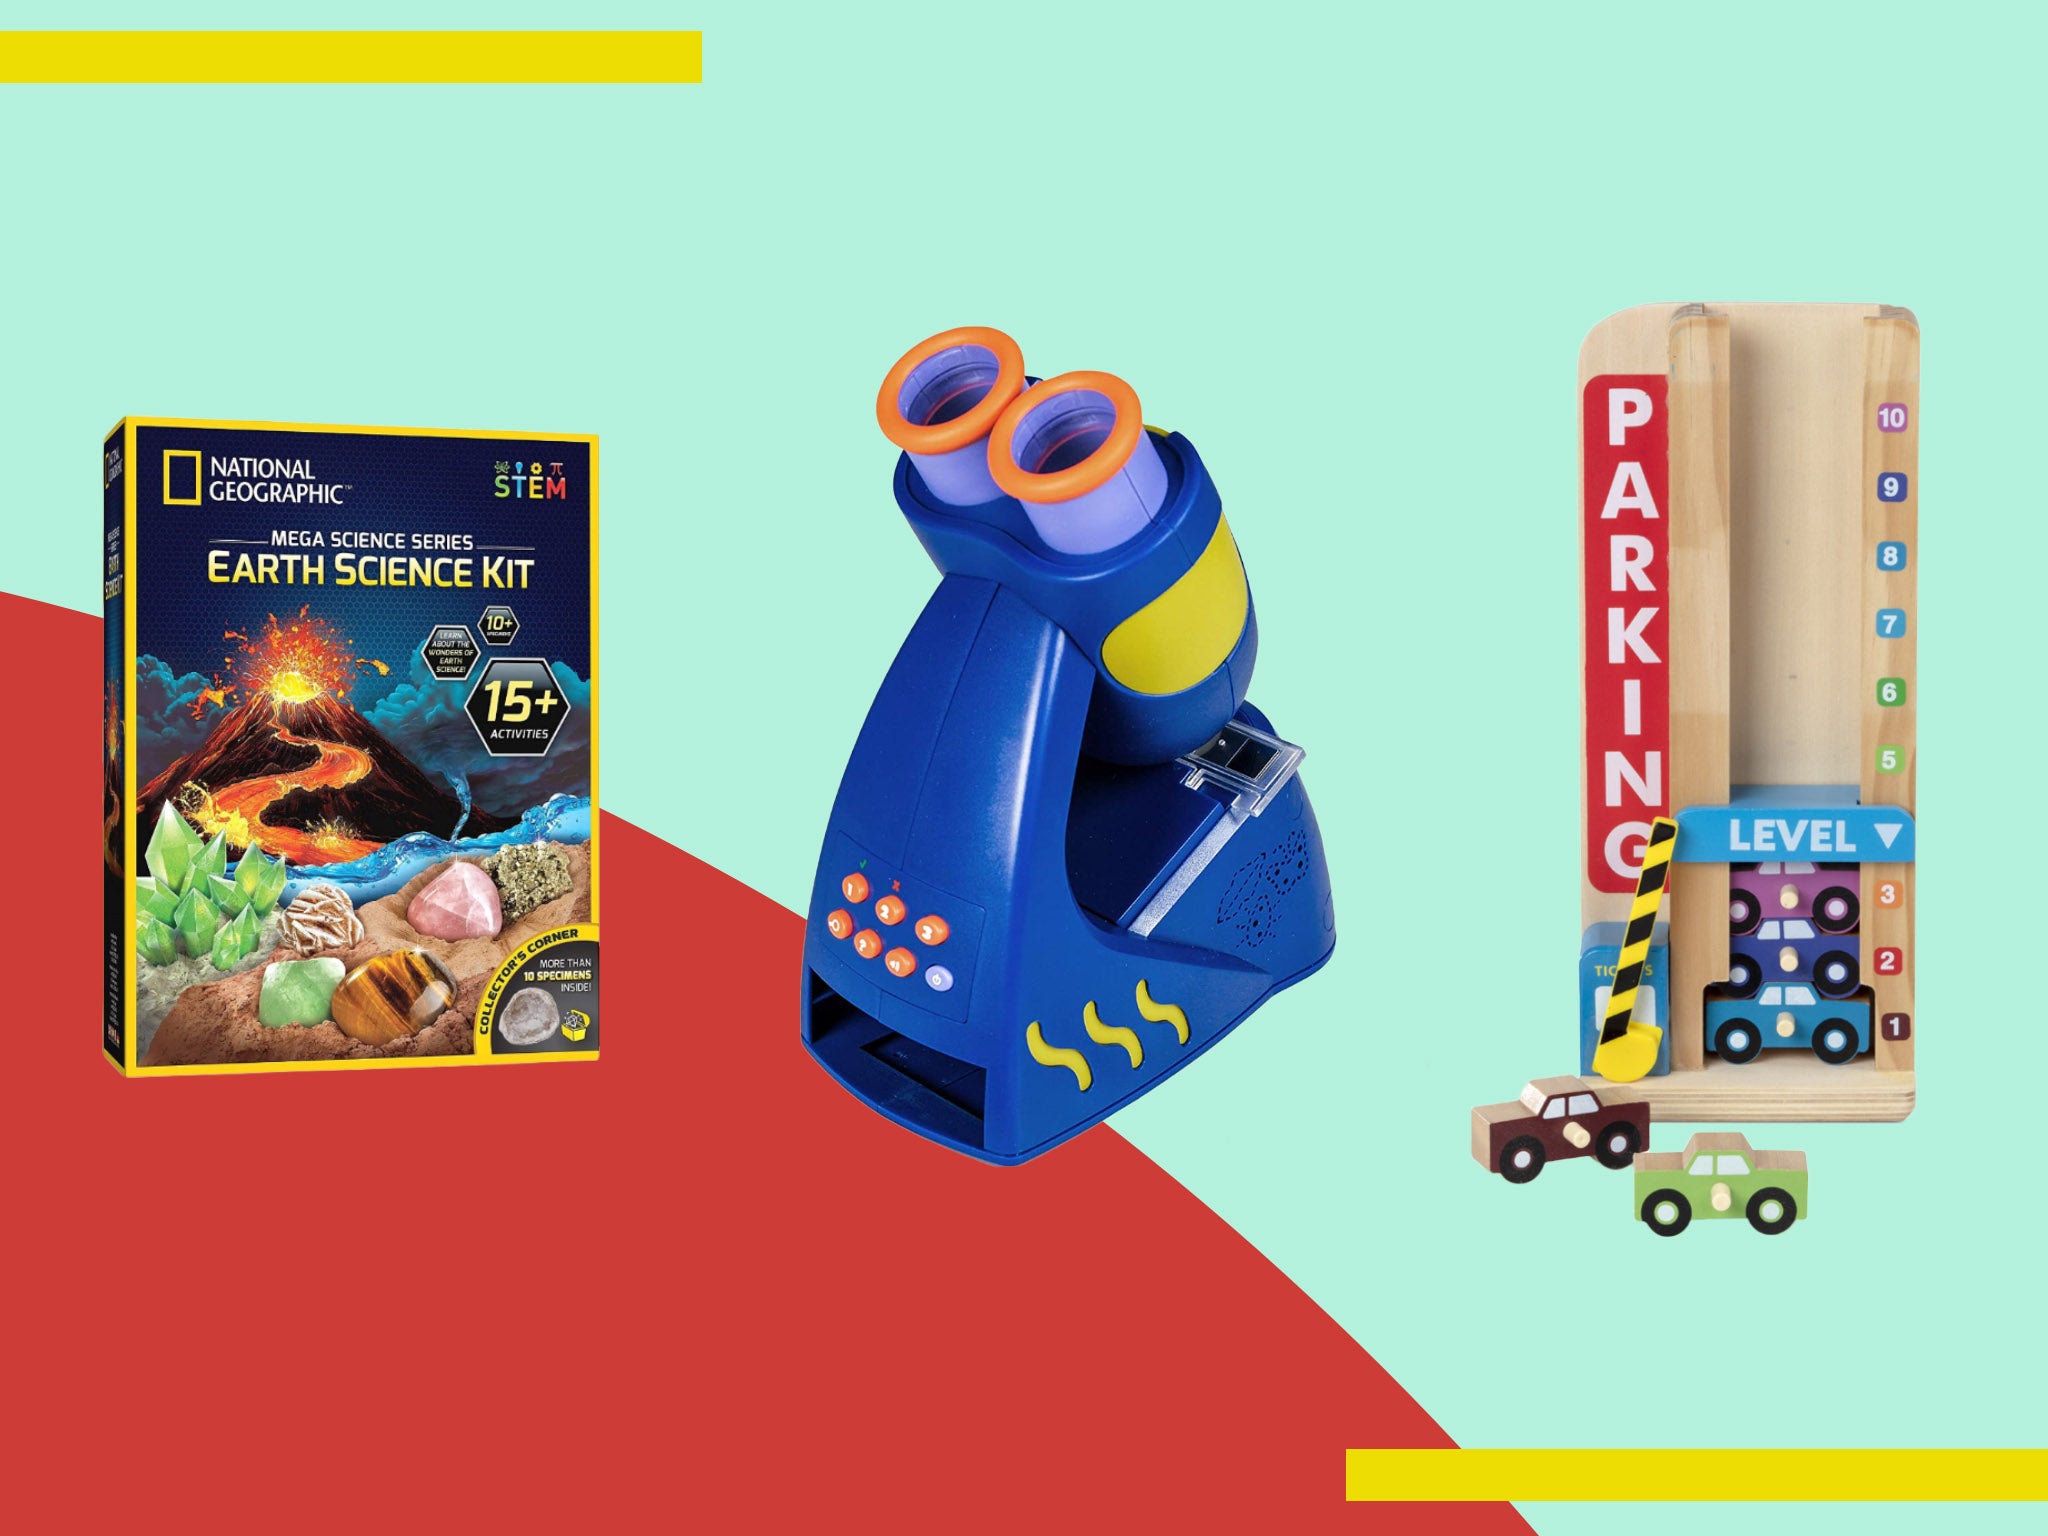 Best educational toys for toddlers to 10 year olds 2021 | The Independent